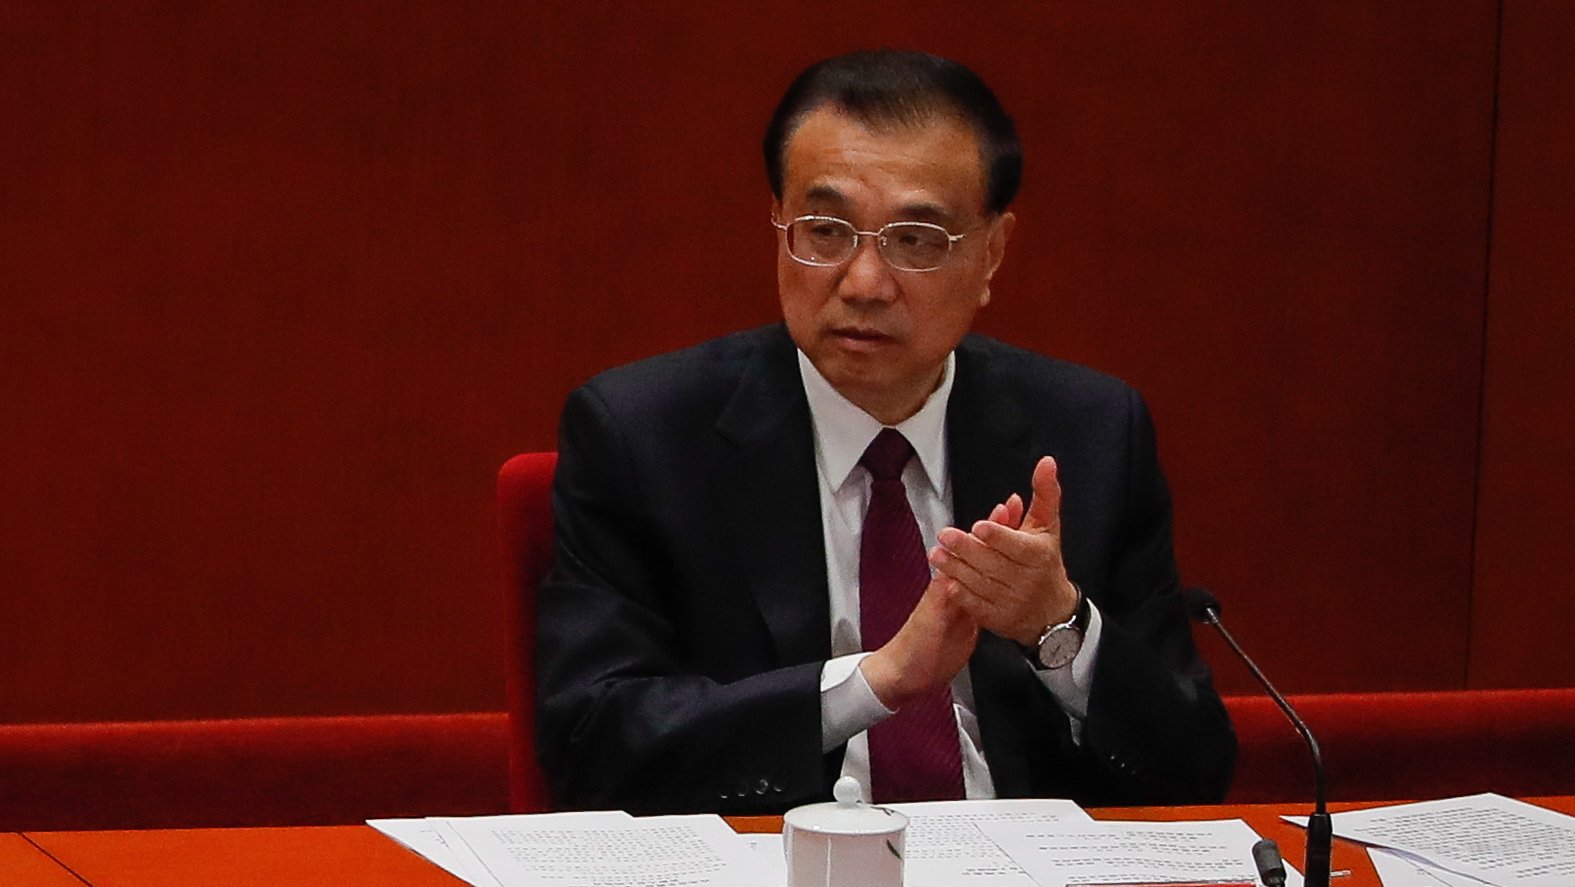 epa09877640 Chinese Premier Li Keqiang applauds during the commending meeting for Beijing 2022 Winter Olympic and Paralympic games at the Great Hall of the People in Beijing, China, 08 April 2022. The 2022 Winter Olympics were held in Beijing from 04 to 20 February, while the 2022 Winter Paralympics were held from 04 to 13 March 2022.  EPA/MARK R. CRISTINO